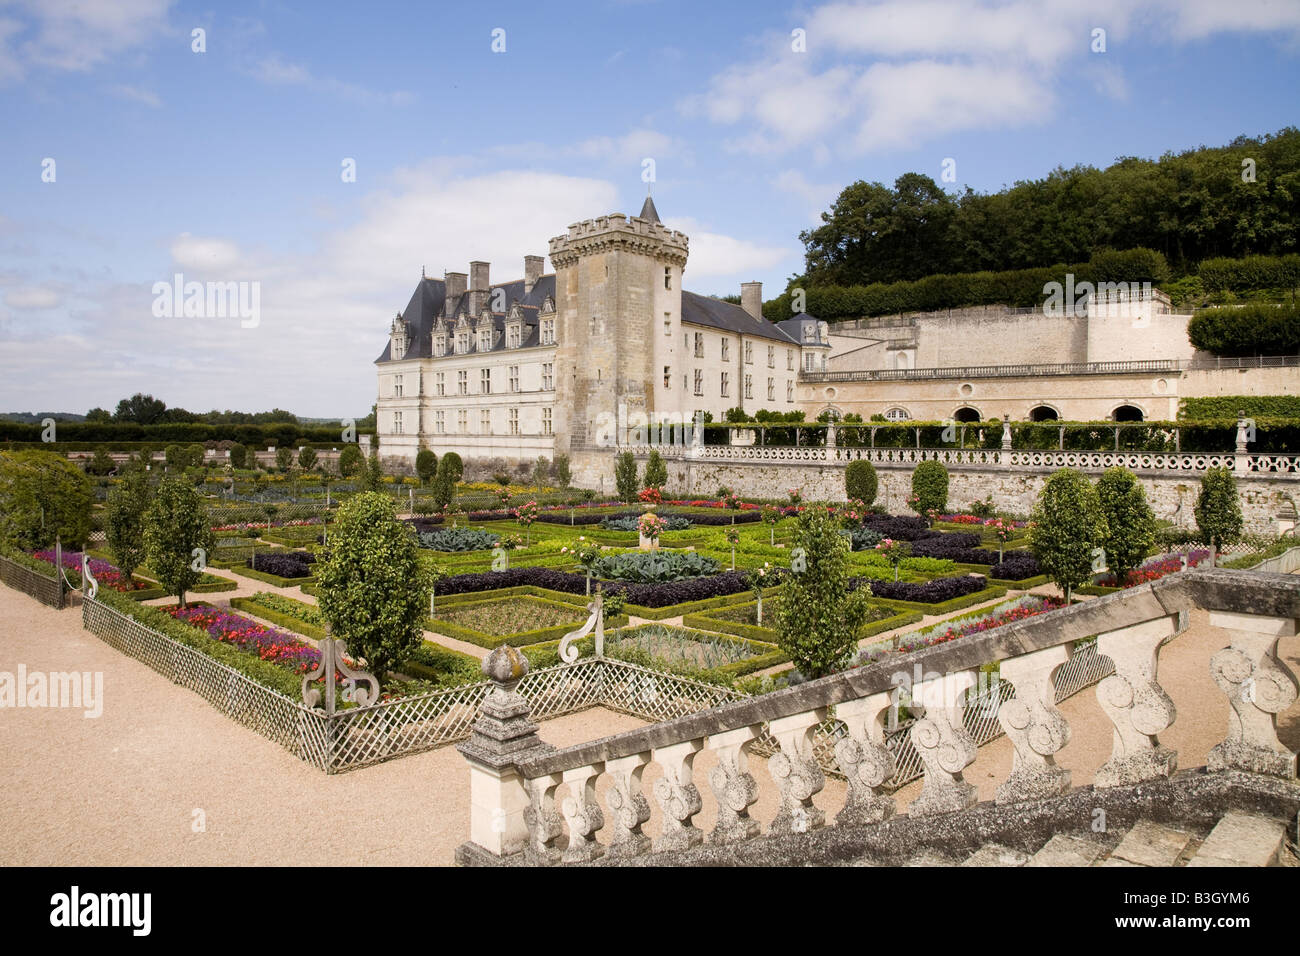 The steps from the middle ornamental garden down to the potager (vegetable) gardens of Chateau Villandry, Loire Valley, France. Stock Photo